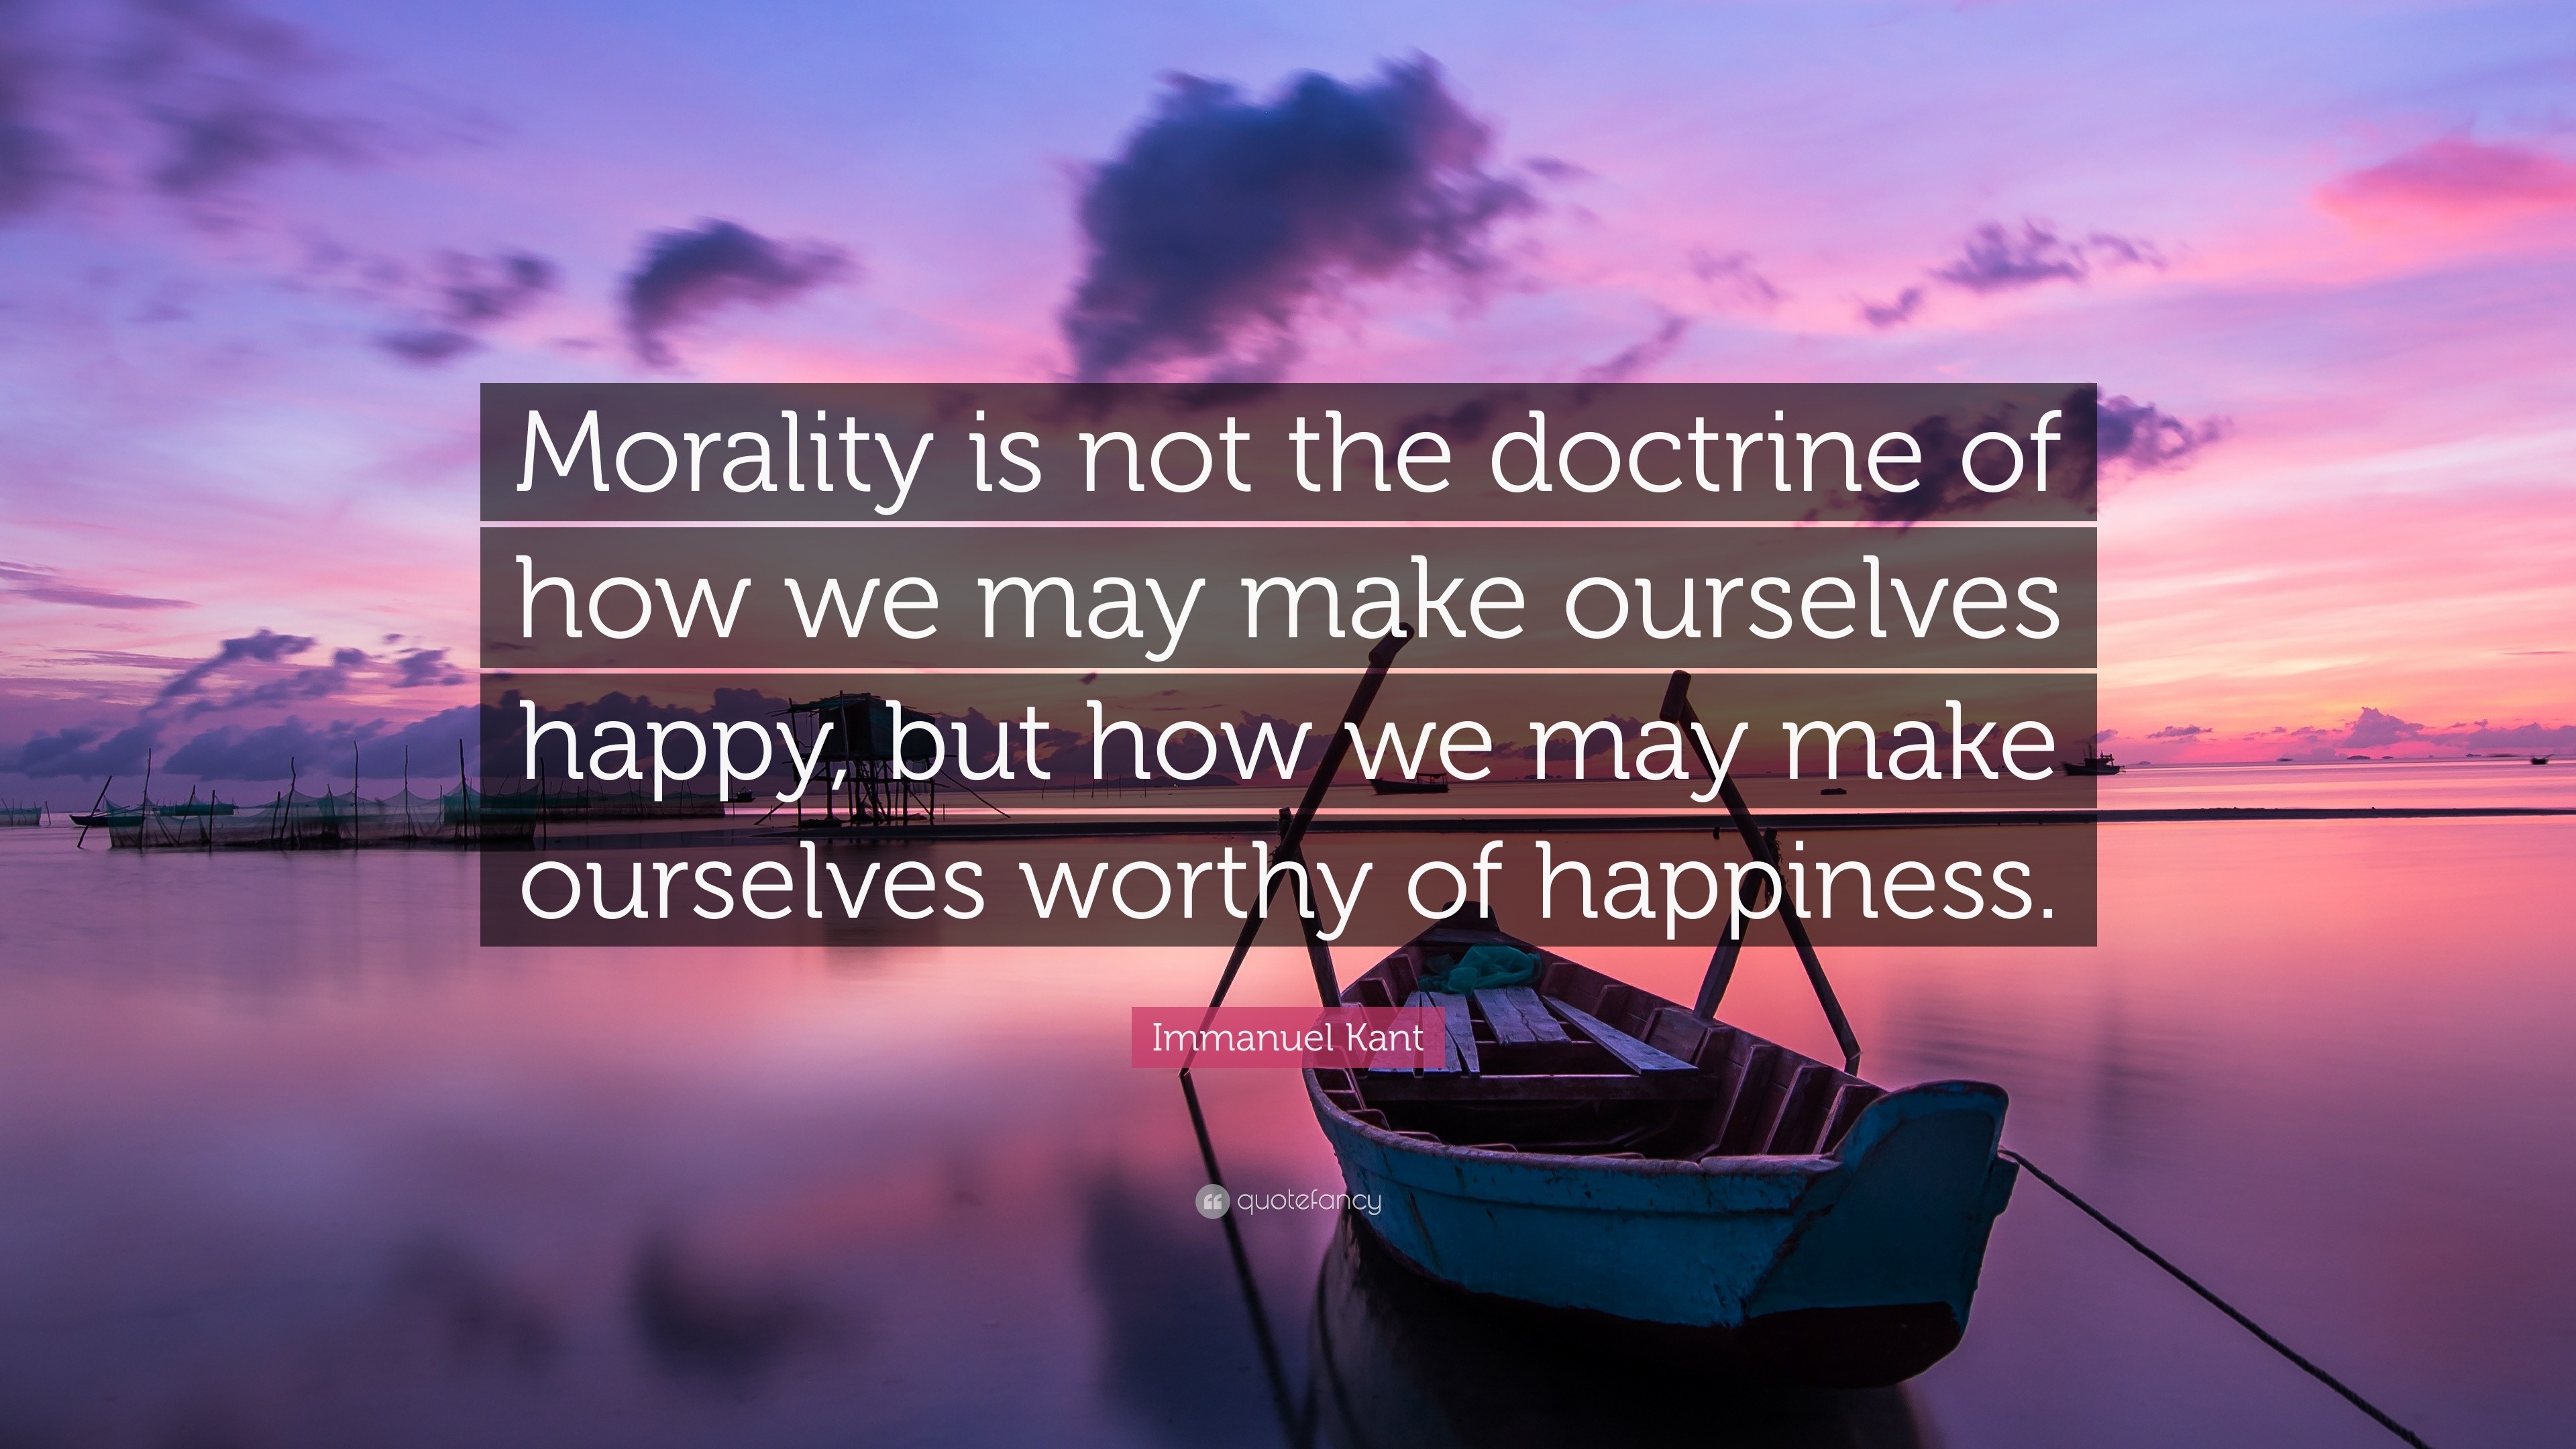 Immanuel Kant Quote: “Morality is not the doctrine of how we may make